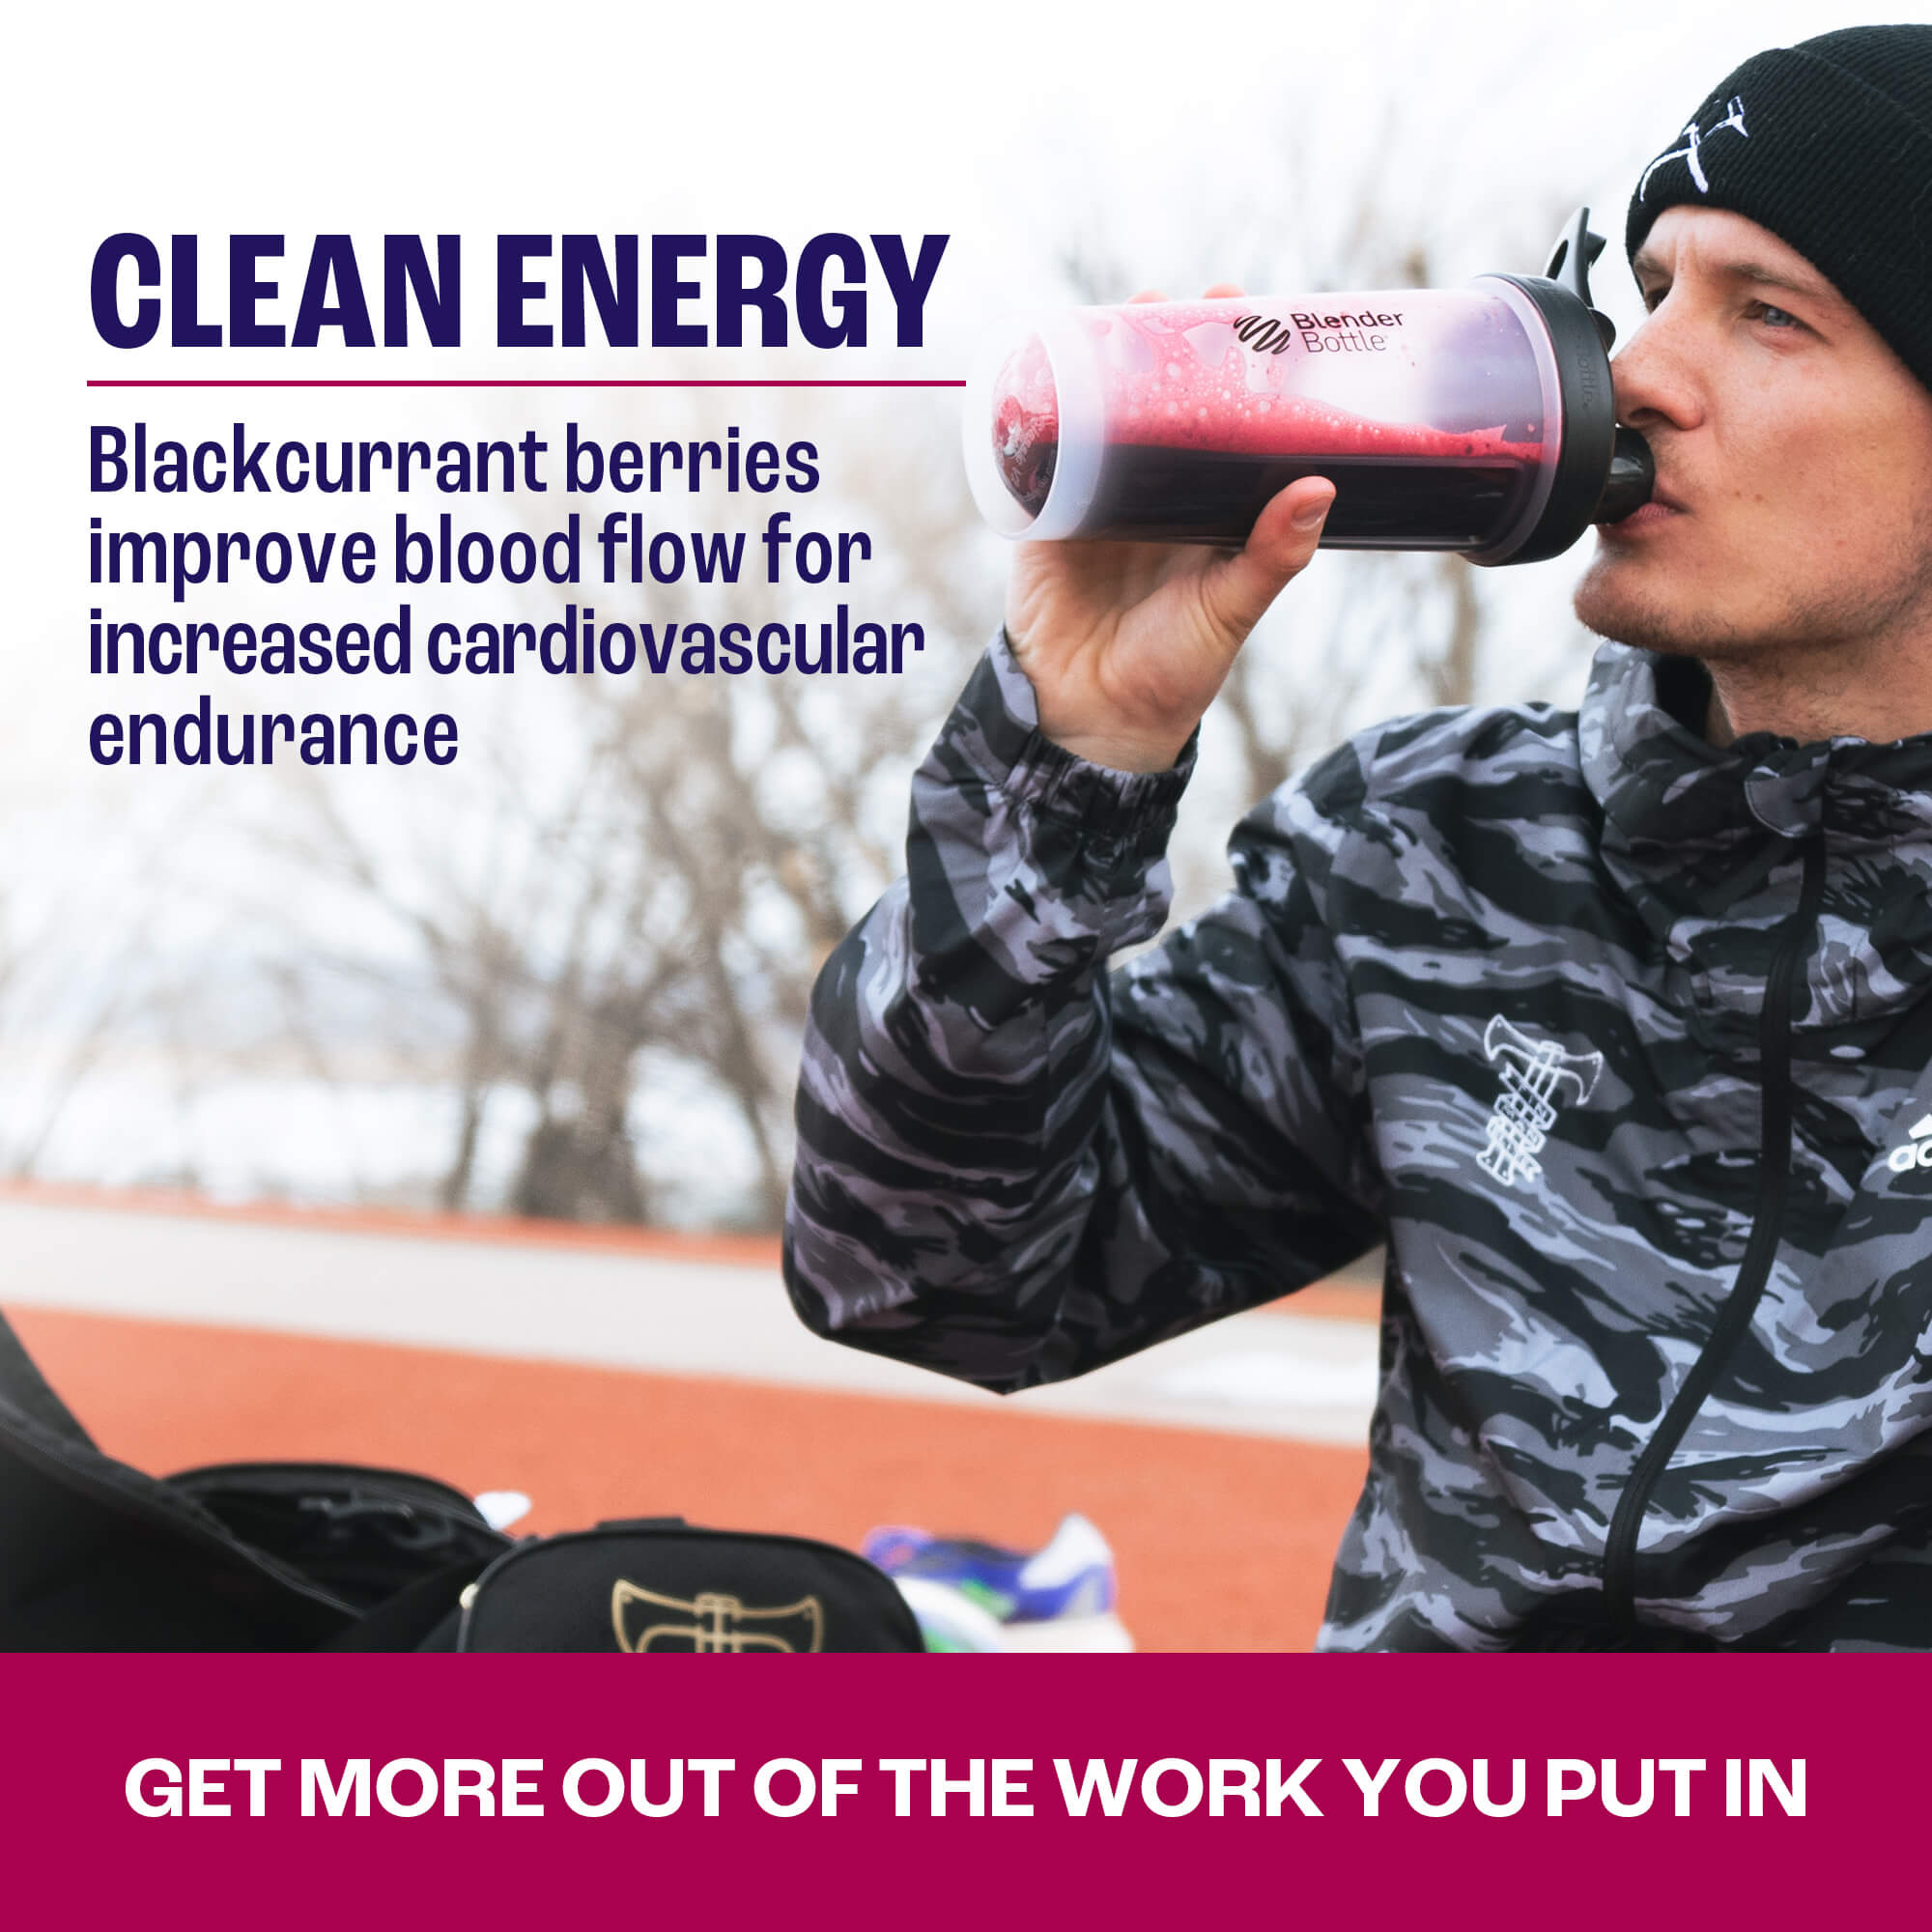 Blackcurrant powder gives you energy as a pre-workout that improves blood flow and cardio exercise performance